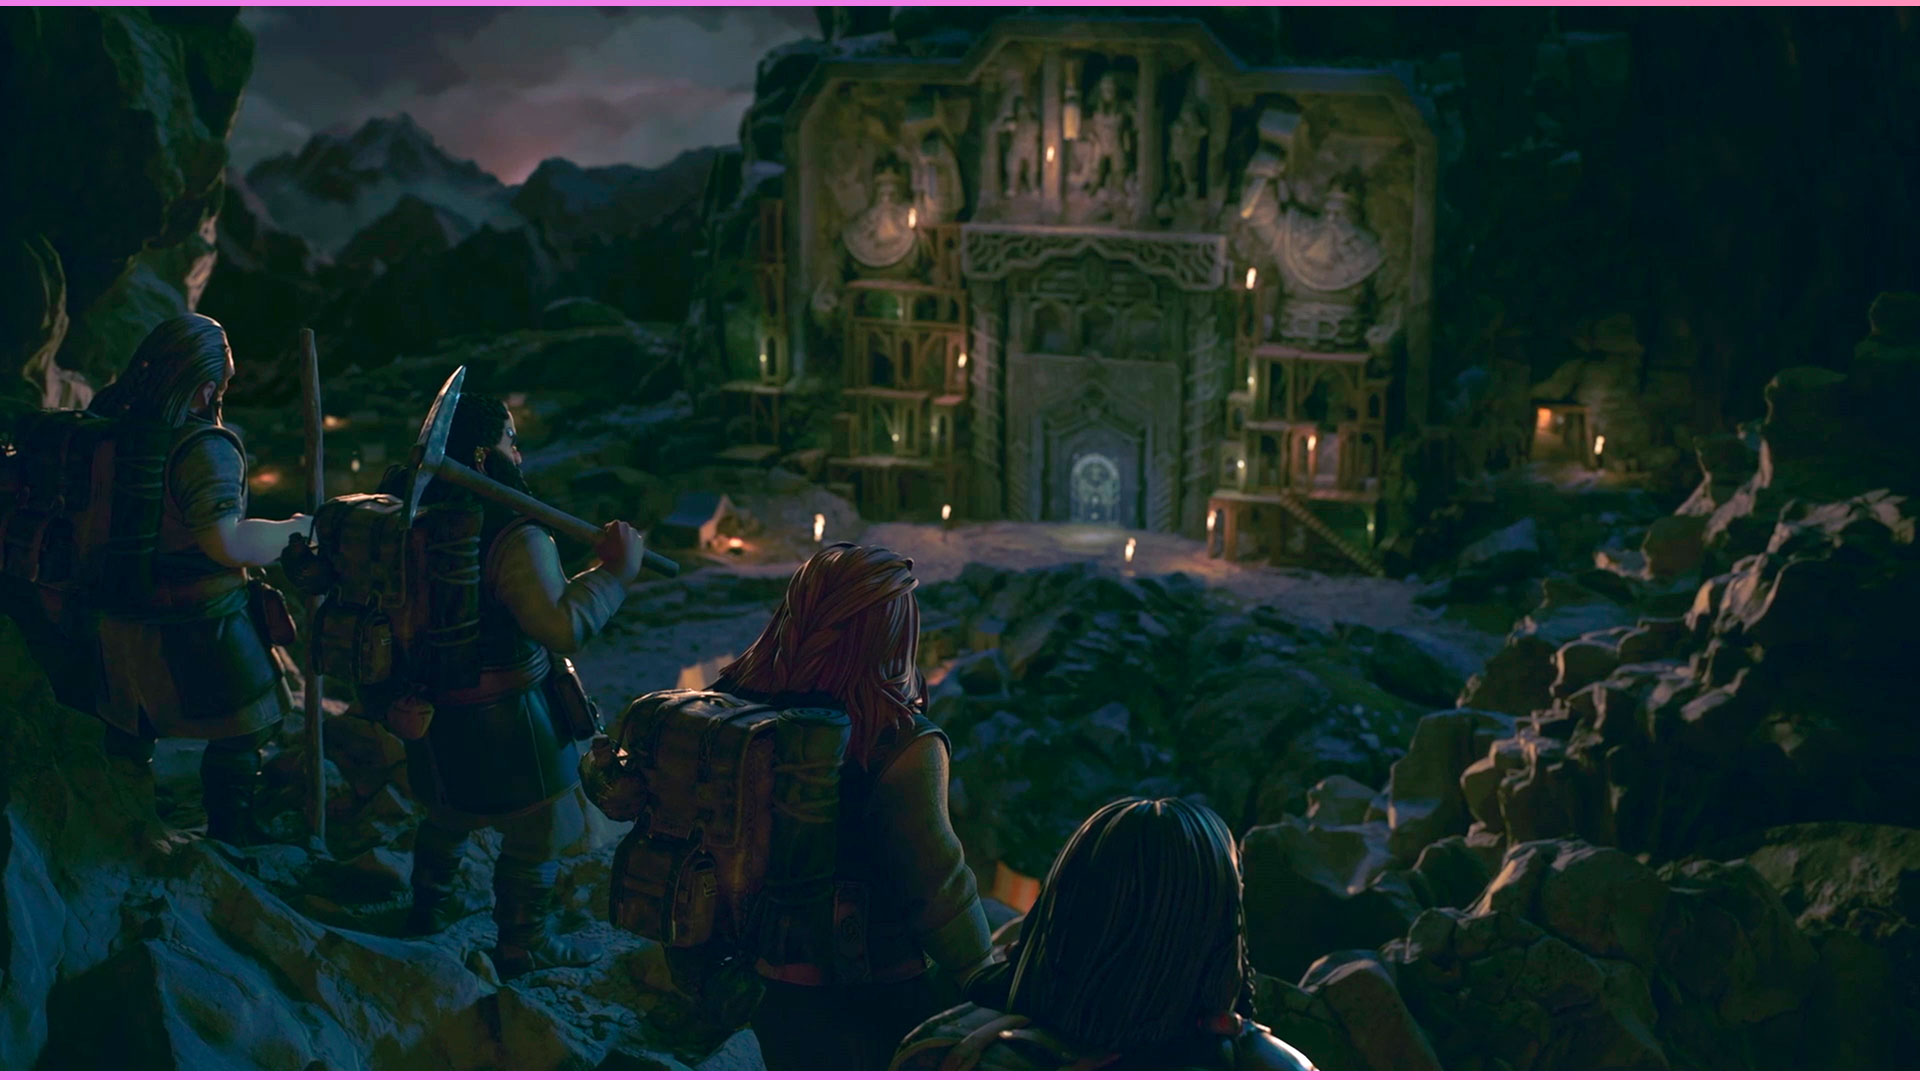 The Lords of the Rings: Return to Moria game screenshot 2